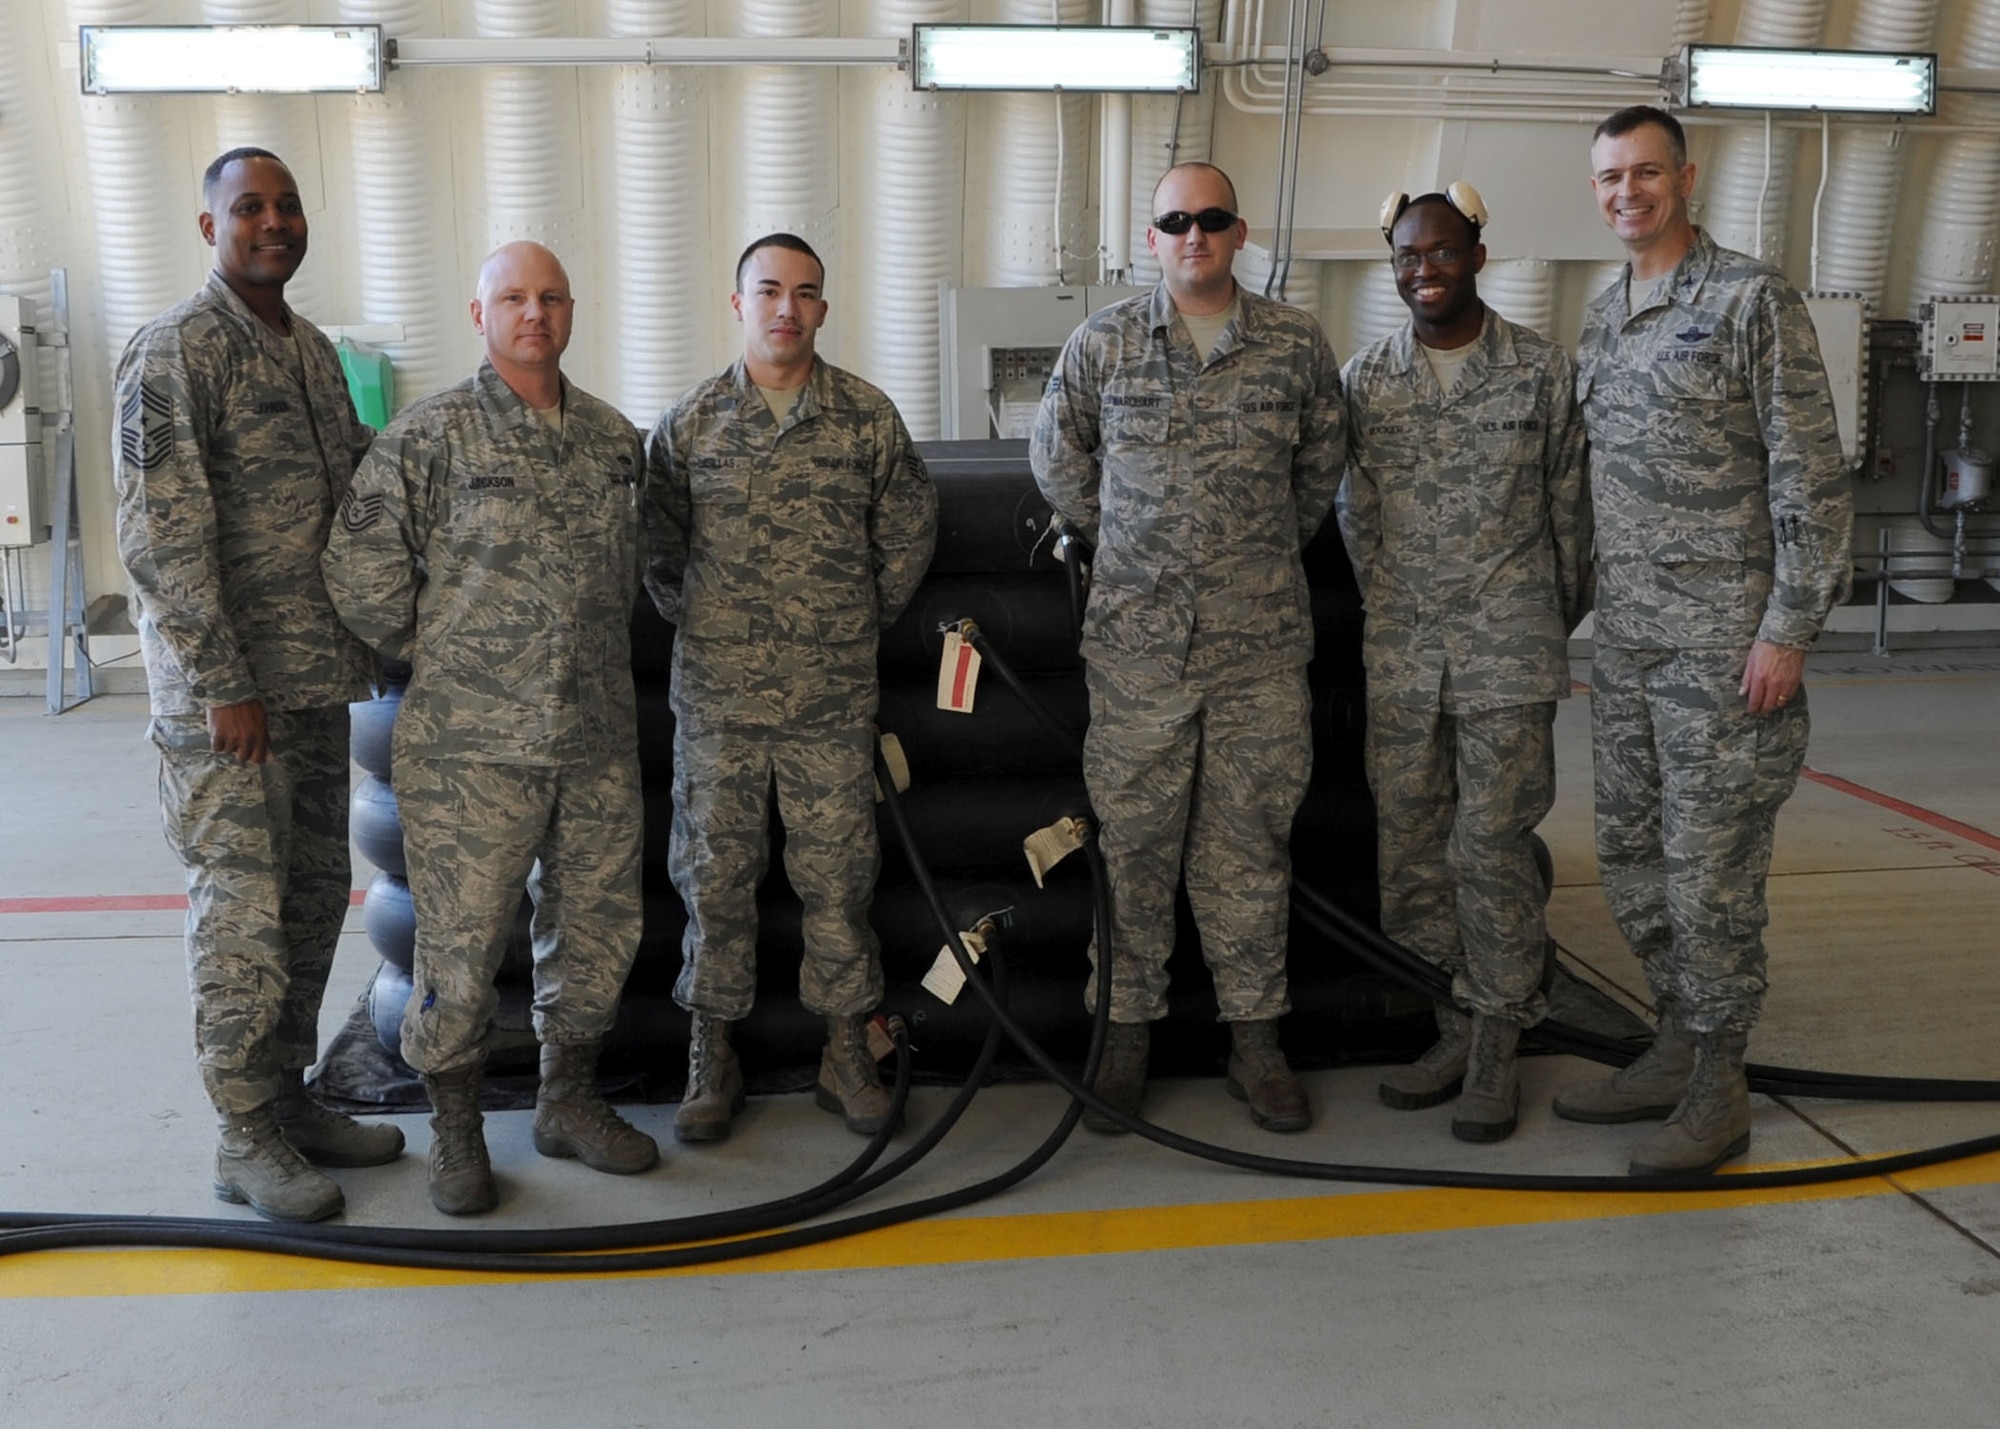 Members from the 39th Maintenance Squadron, Crash Disabled Damaged Aircraft Recovery team, poses for a group photo with Col. Craig Wills, 39th Air Base Wing commander, and Chief Master Sgt. Anthony Johnson, 39th ABW command chief, Jan. 23, 2014, at Incirlik Air Base, Turkey.  The team demonstrated of the squadrons Crash Disabled Damaged Aircraft Recovery capability using the pneumatic airbag system. The air-bag technique is a last resort process, which provides lift capabilities in the event of a damaged aircraft. The CDDAR team maintains the training and knowledge to safely lift a damaged airframe. (U.S. Air Force photo by Staff Sgt. Veronica Pierce/Released)